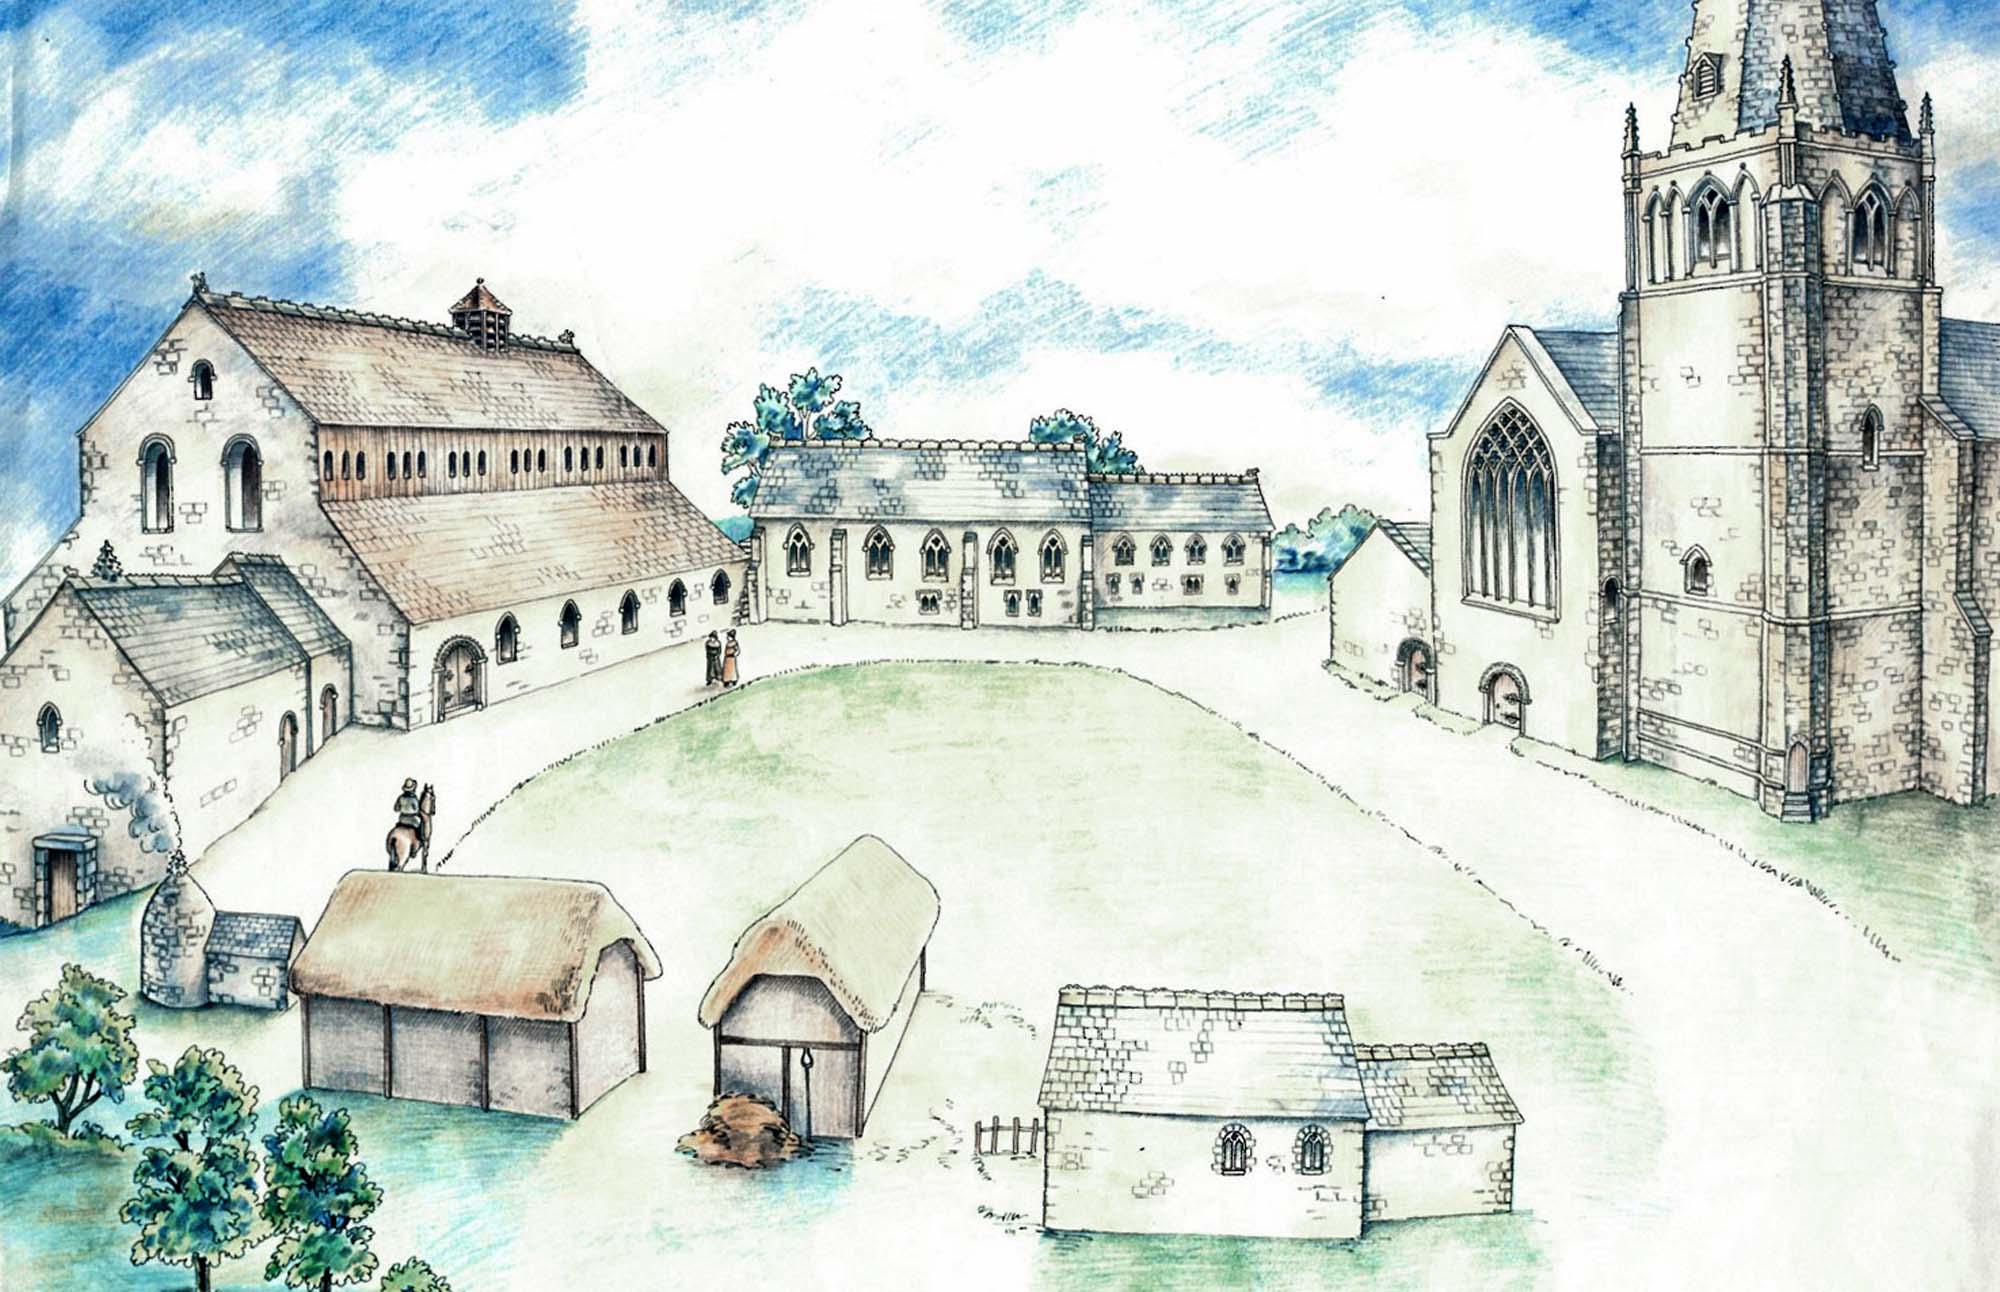 An artist’s impression of the bailey of Leicester Castle, viewed from the motte, as it may have looked c.1300 - Sarah Geeves